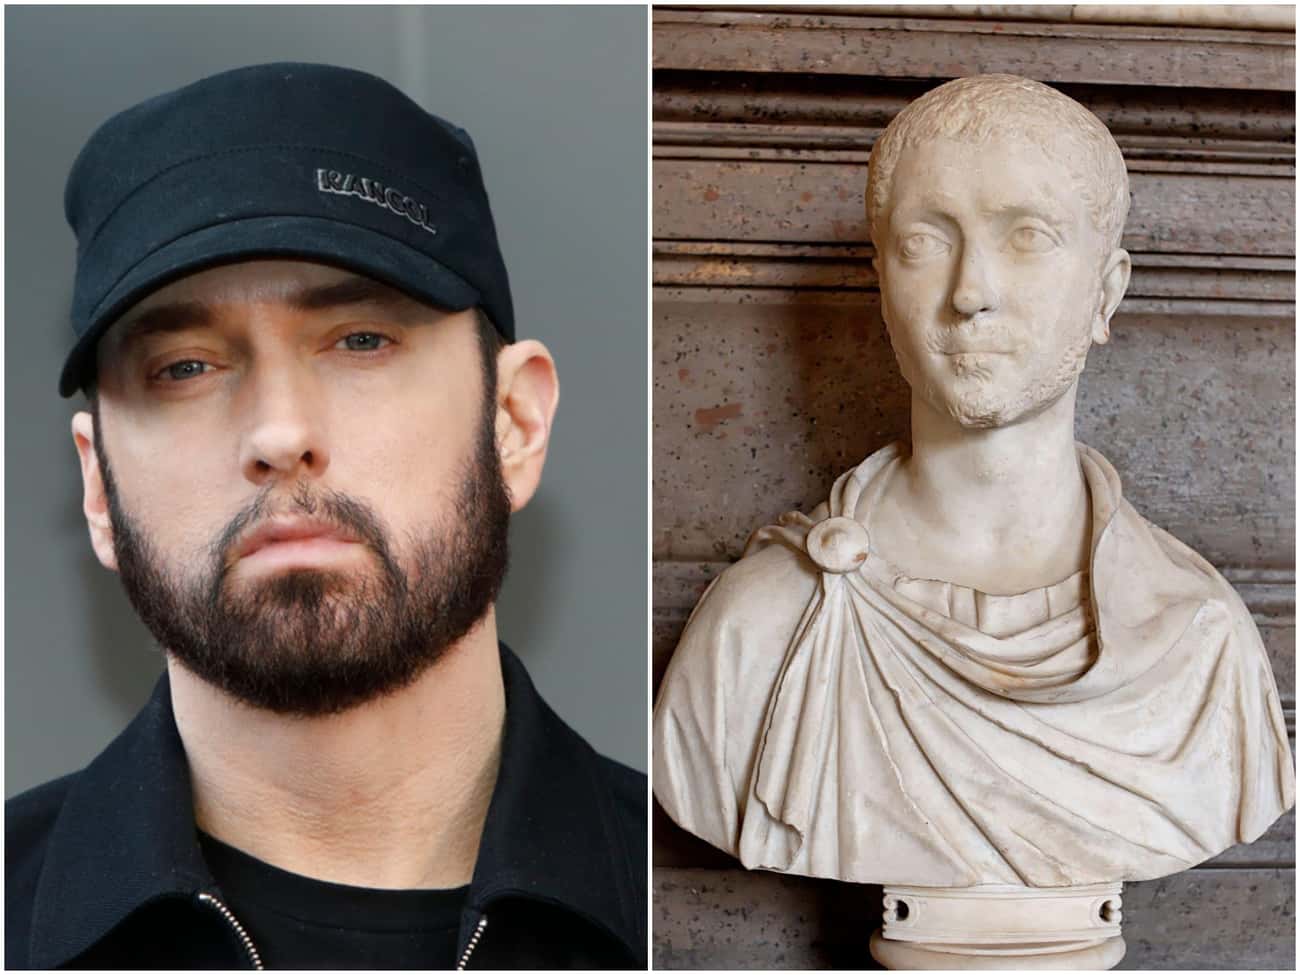 Severus Alexander Or Eminem - Who Is The Real Slim Shady?